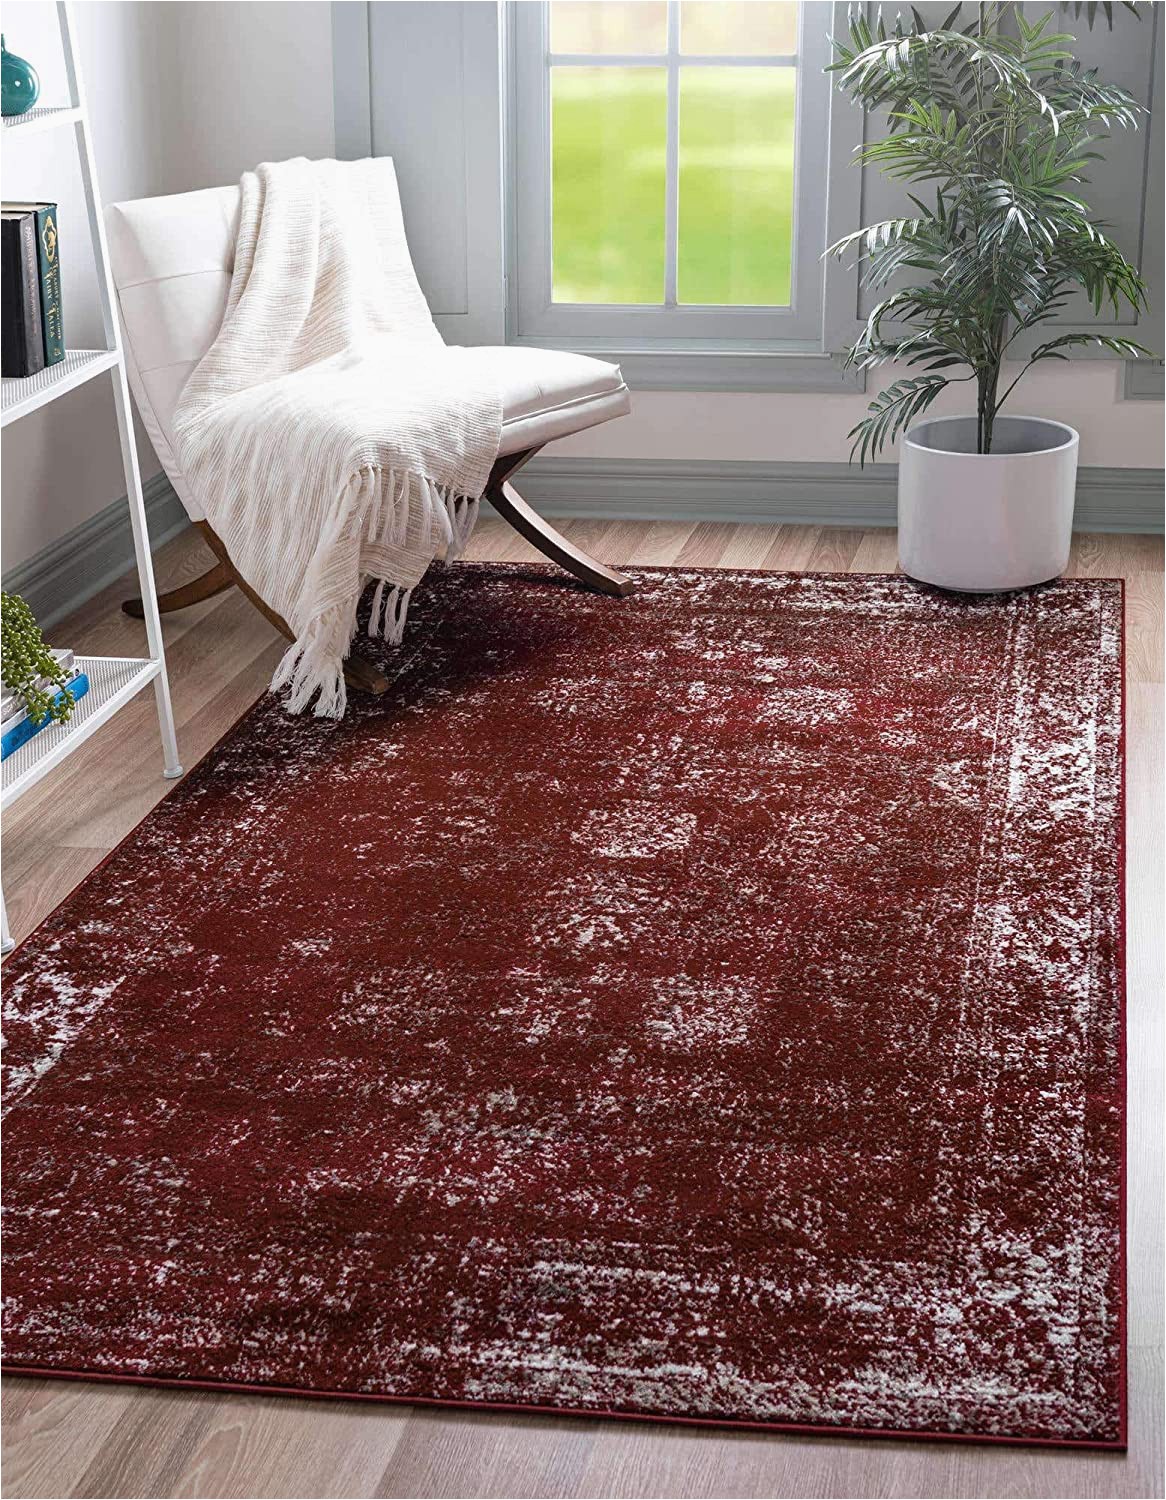 Large area Rugs Under $50 Unique Loom sofia Traditional area Rug 5 0 X 8 0 Burgundy